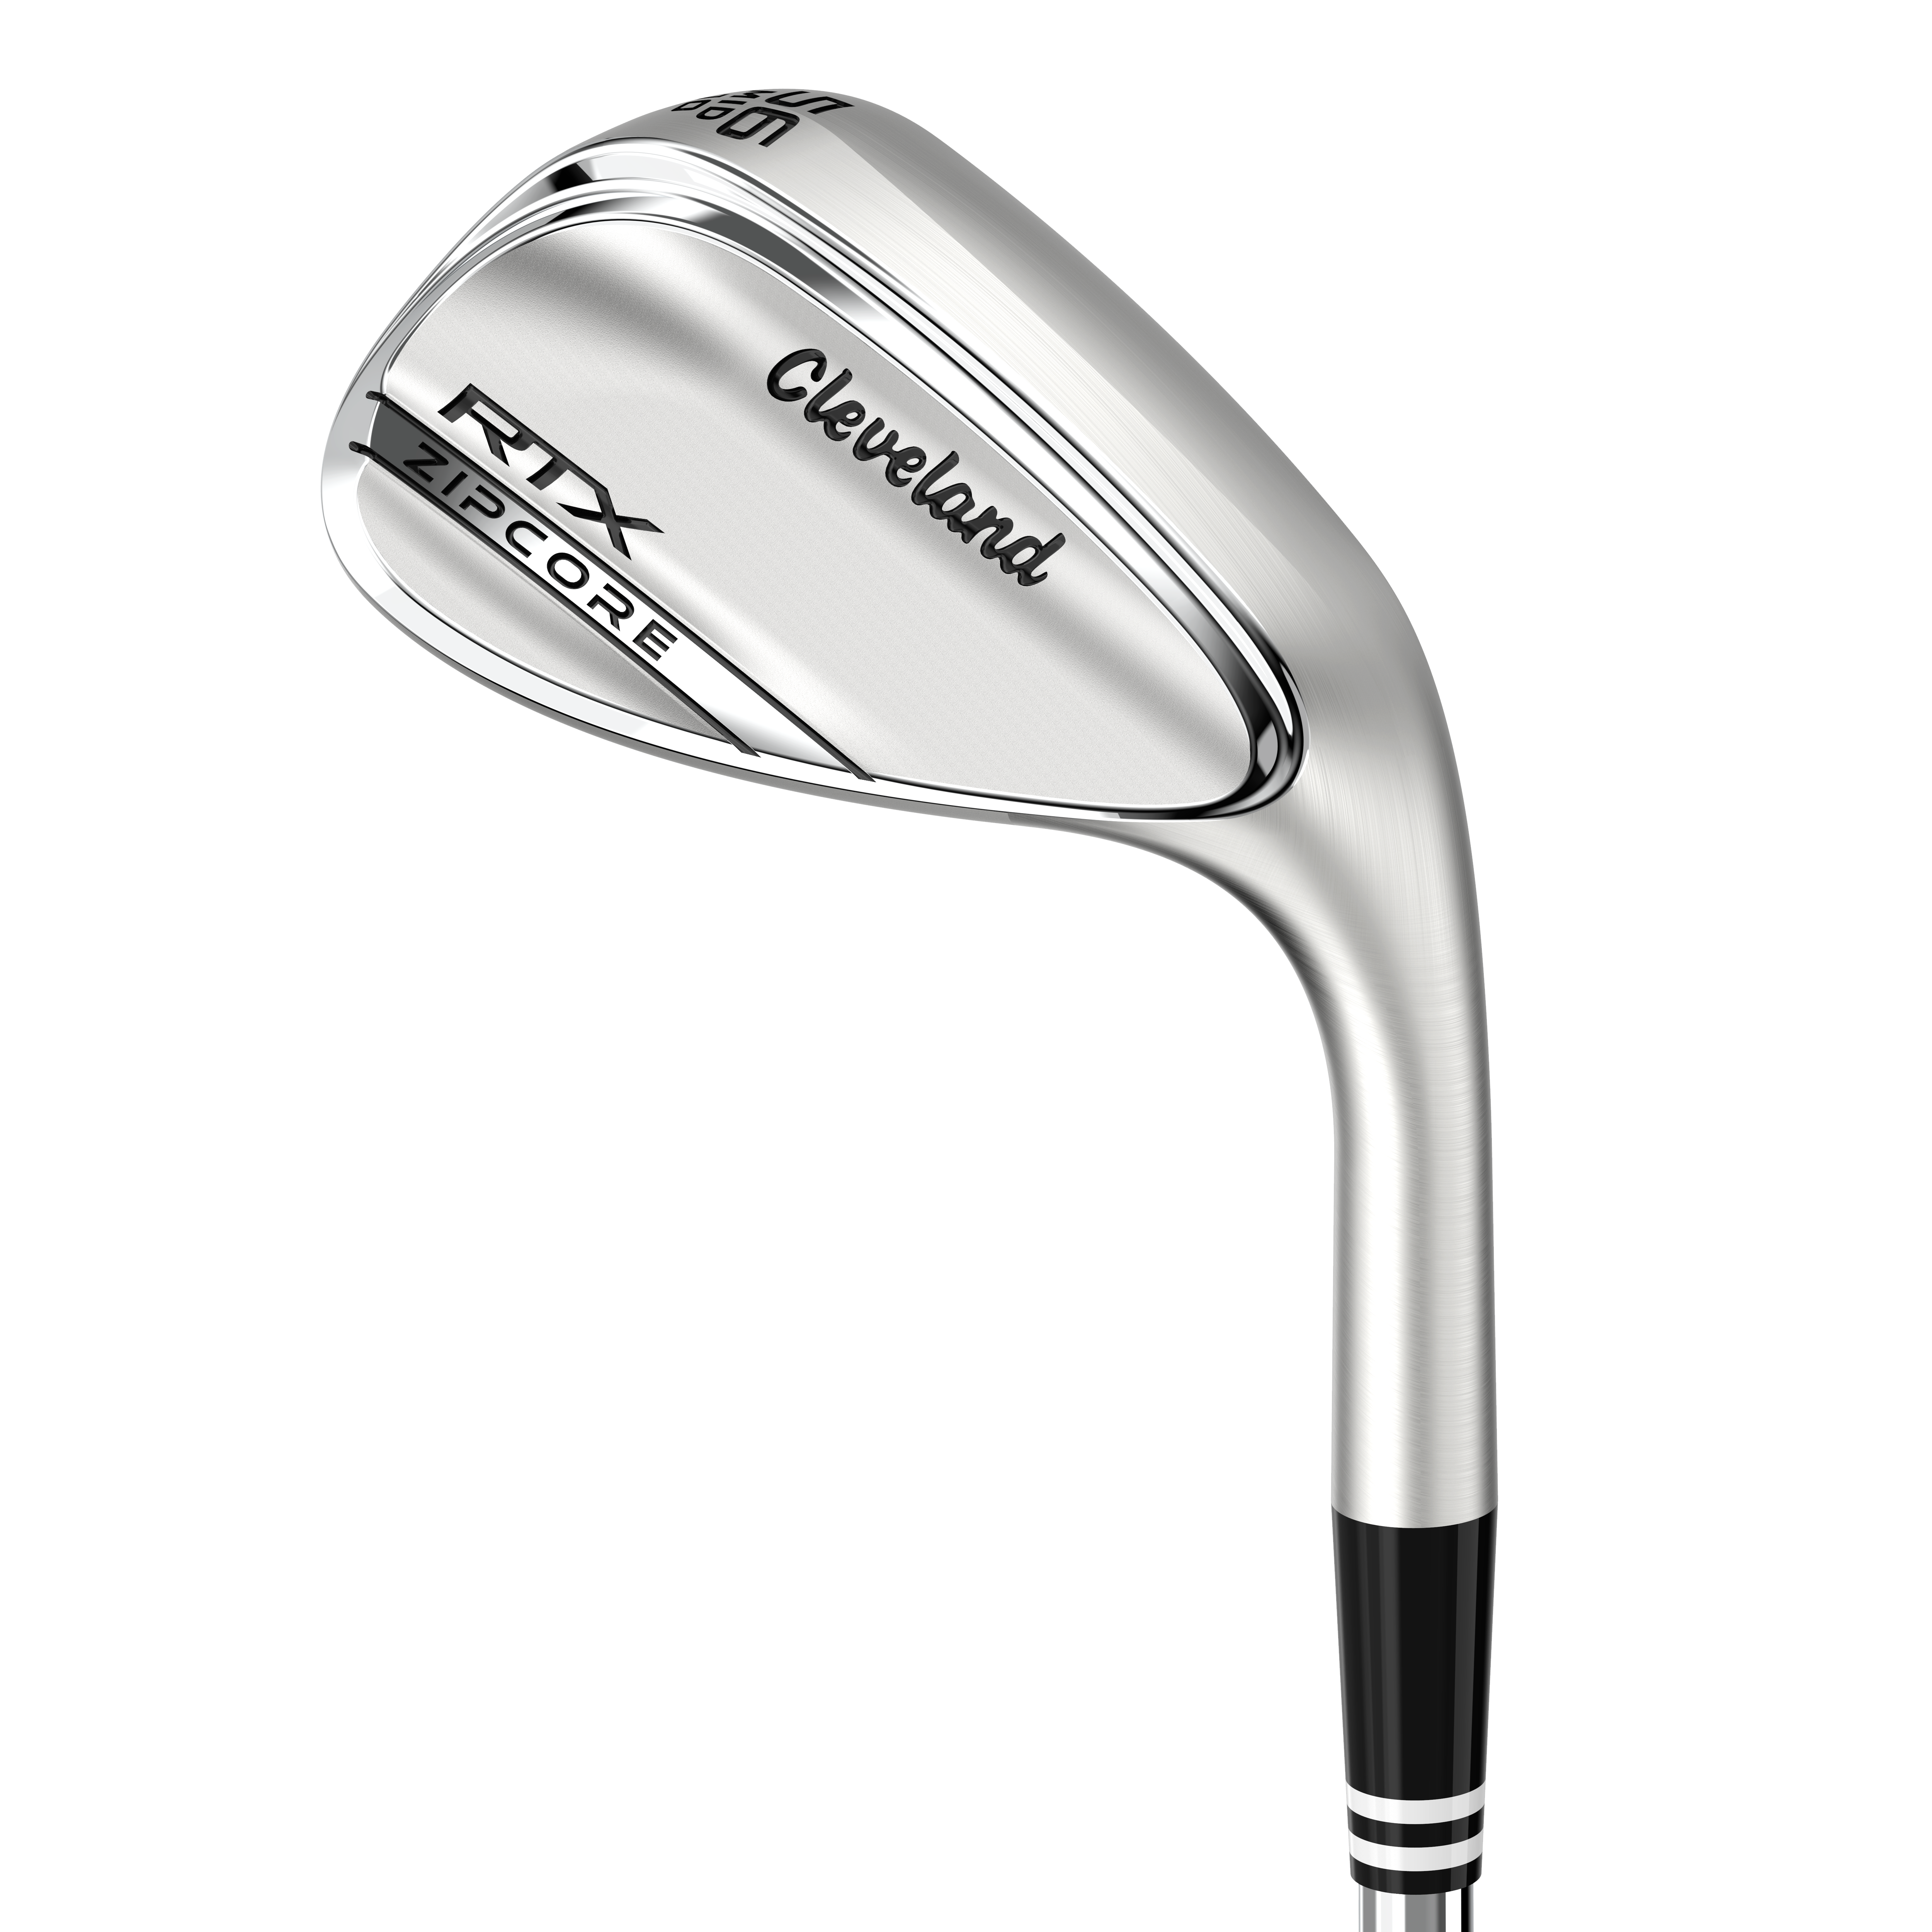 RTX Zipcore Tour Satin Wedge with Steel Shaft